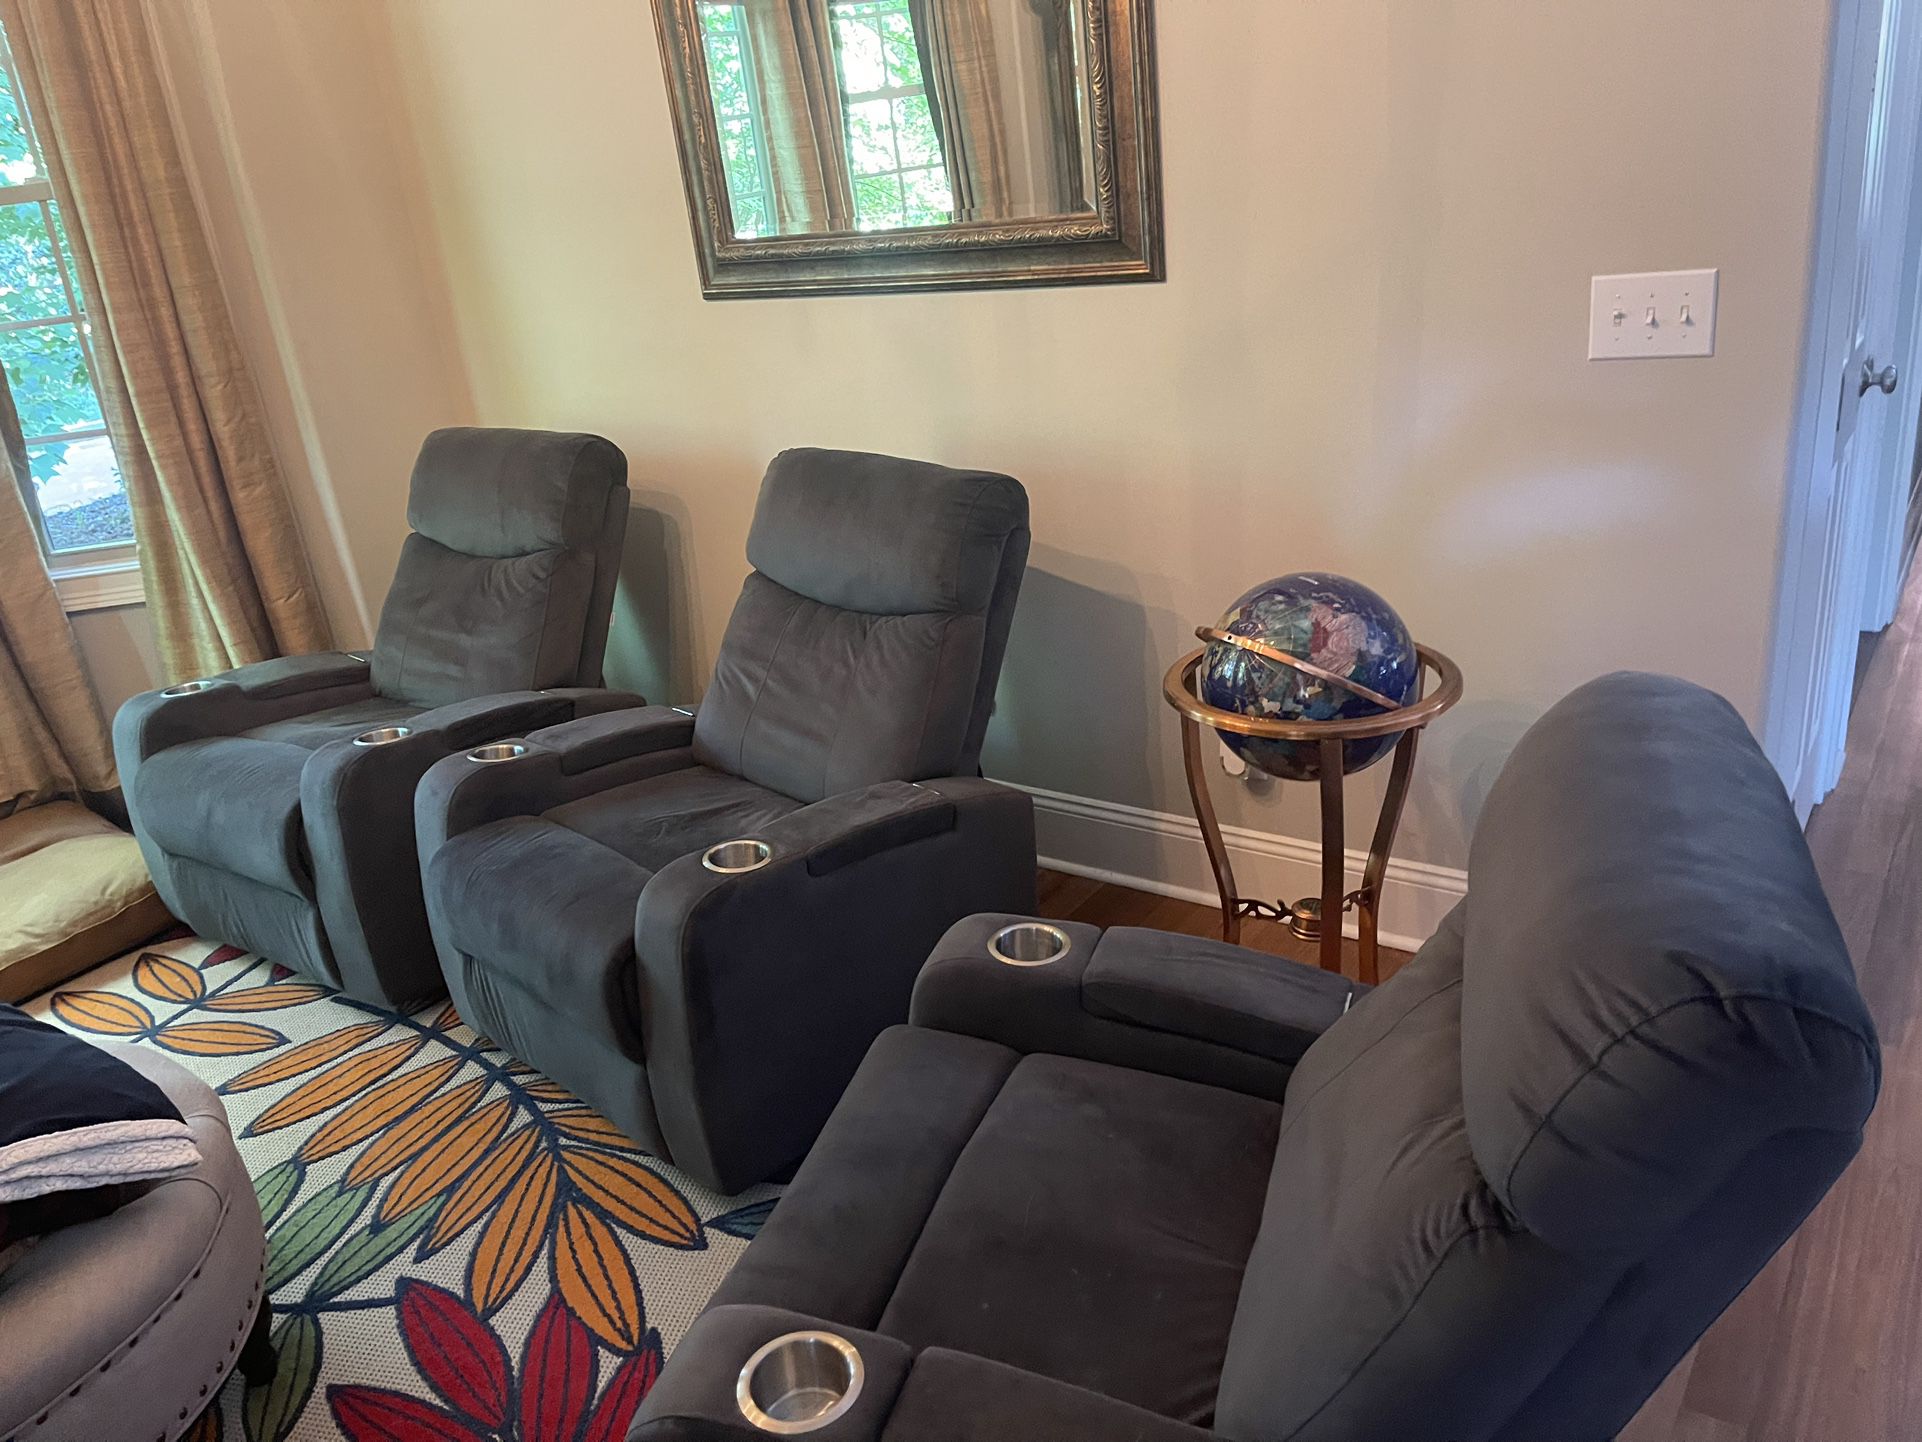 3 Movie Room Chairs For $150